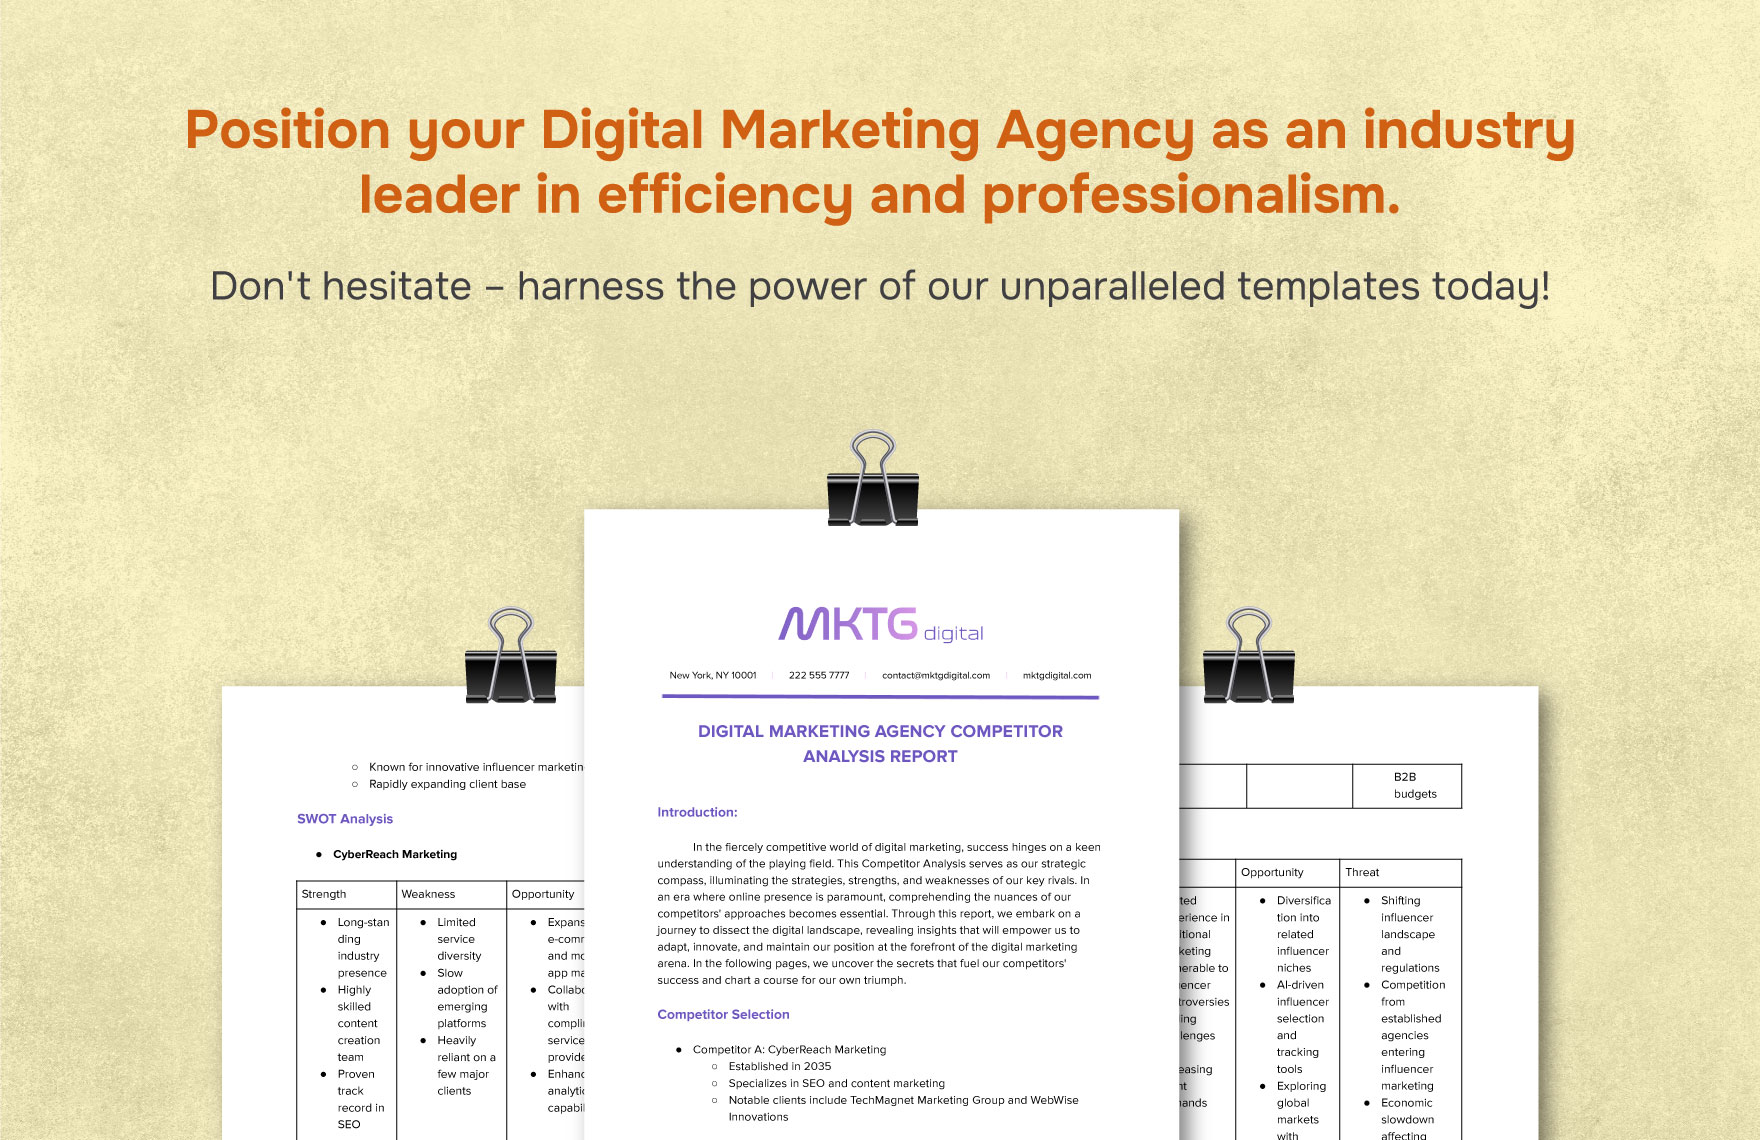 Digital Marketing Agency Competitor Analysis Report Template